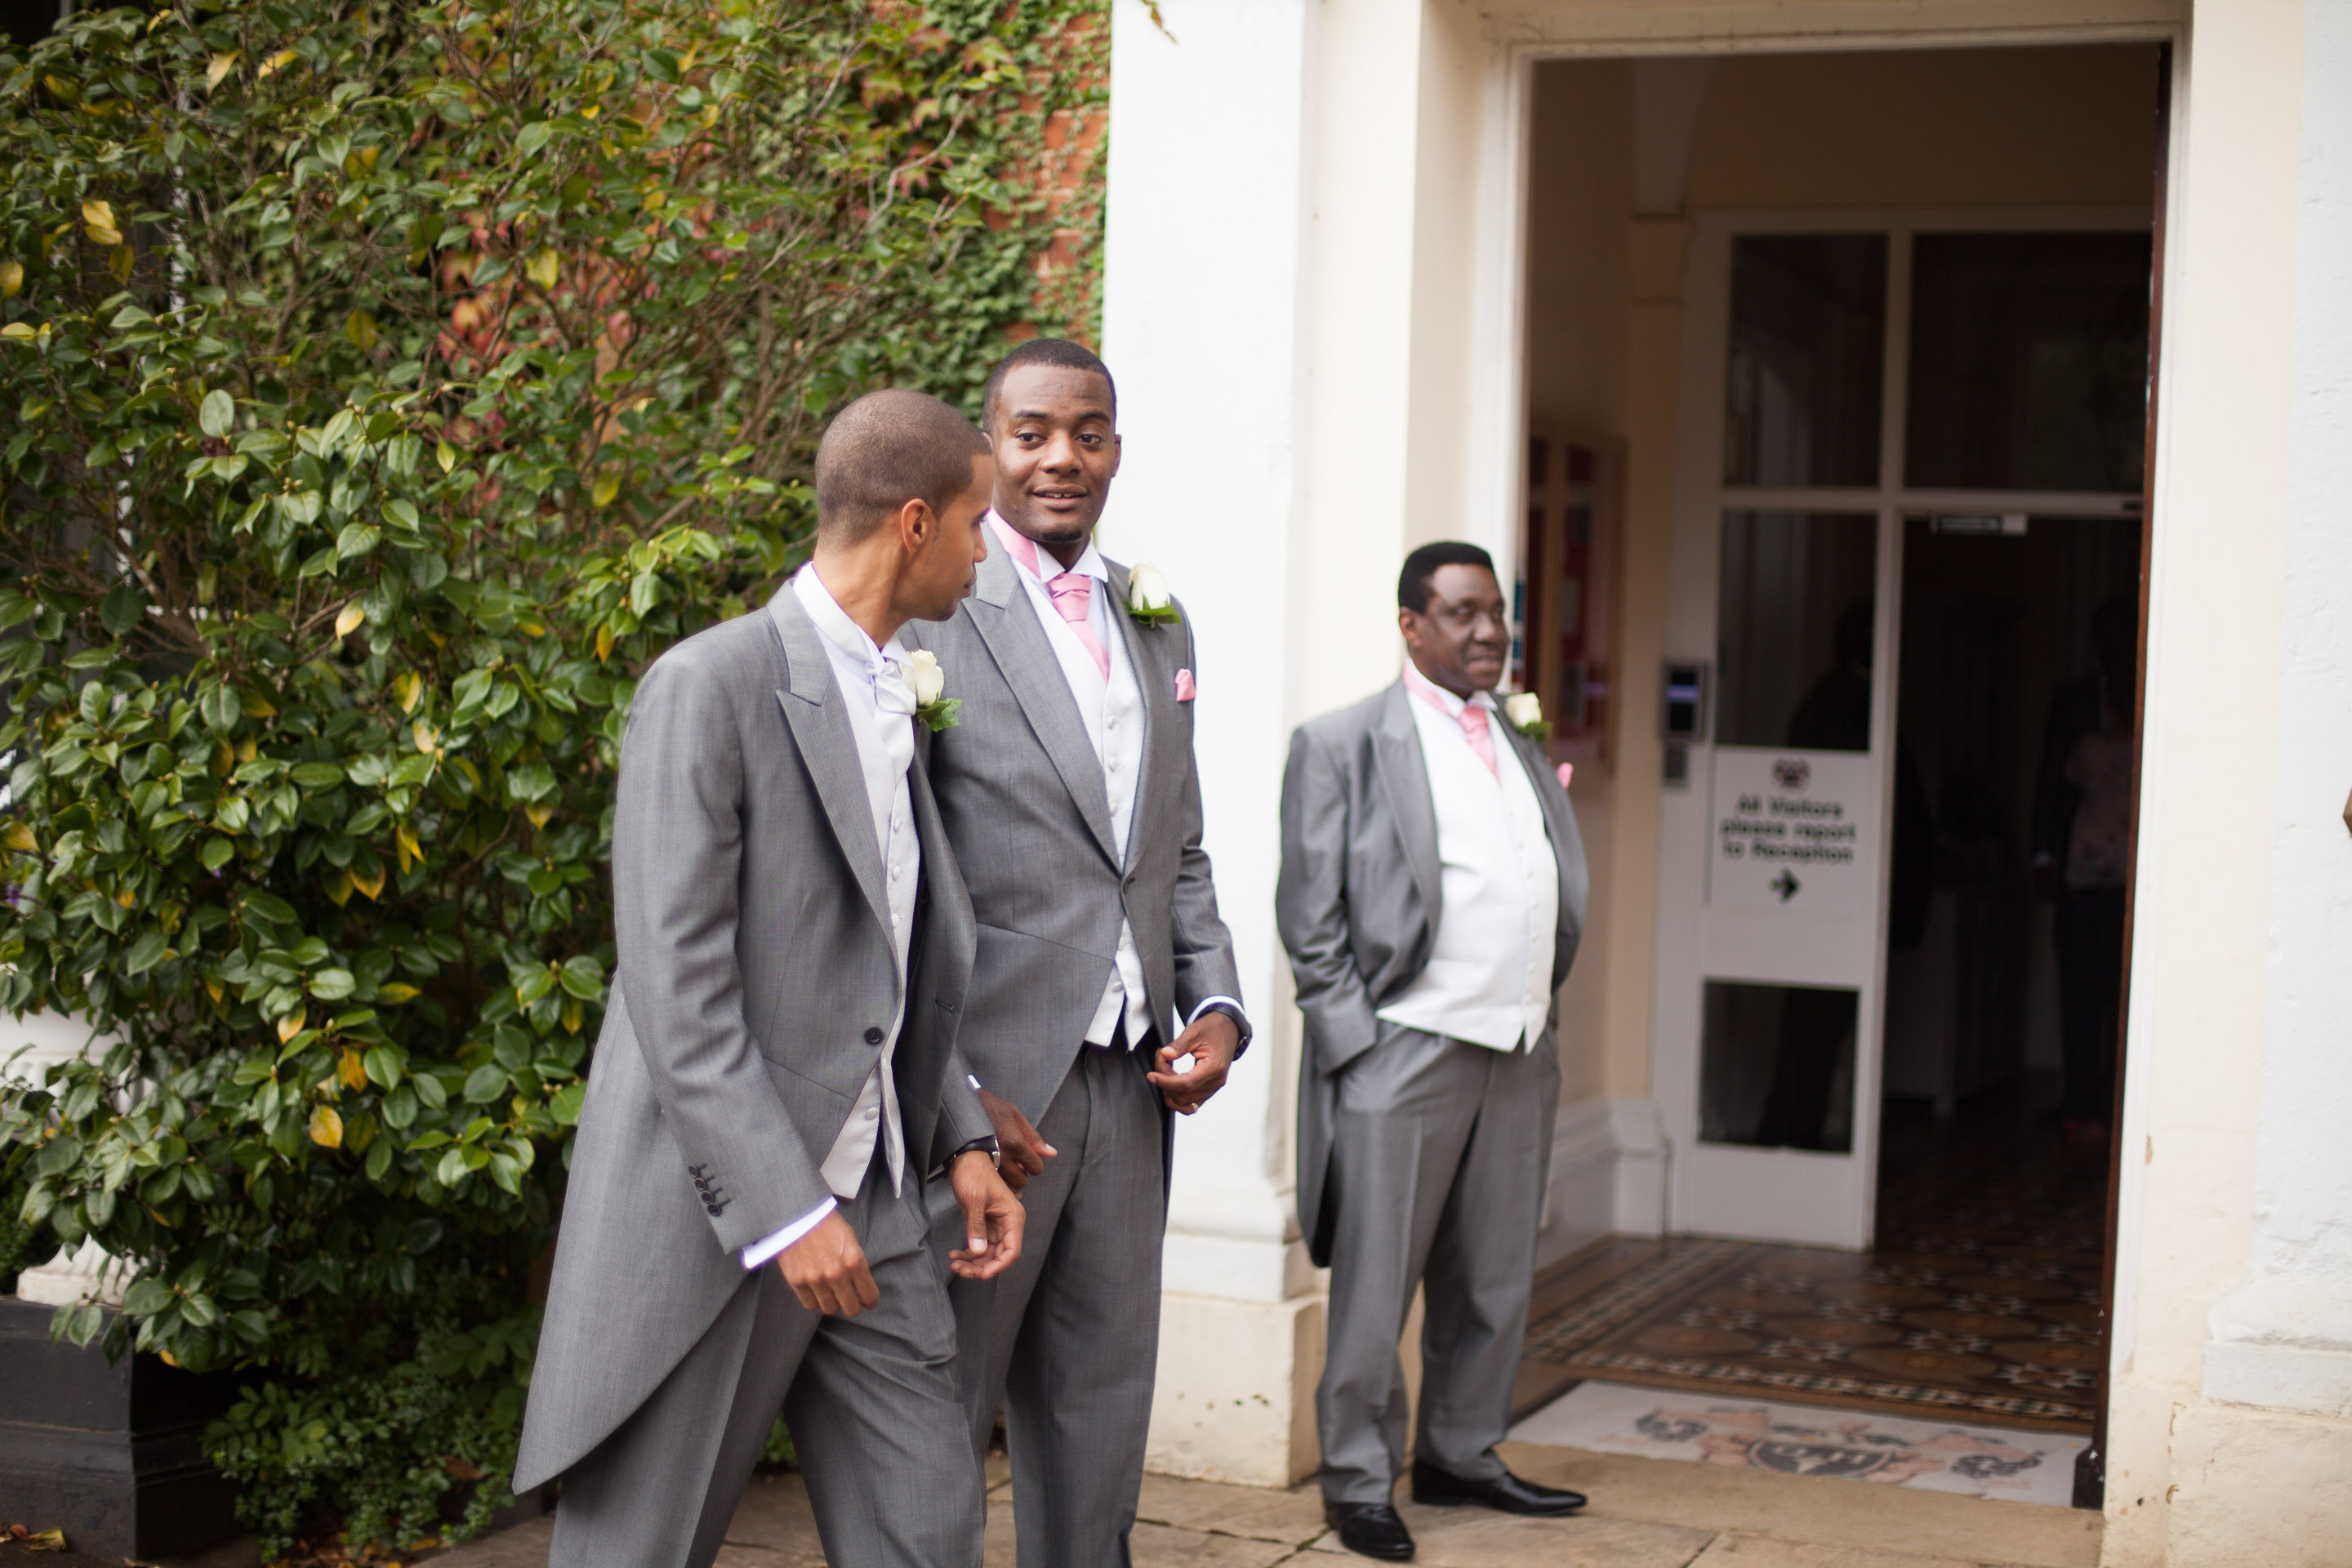 Groom and his best men preparing to enter the venue